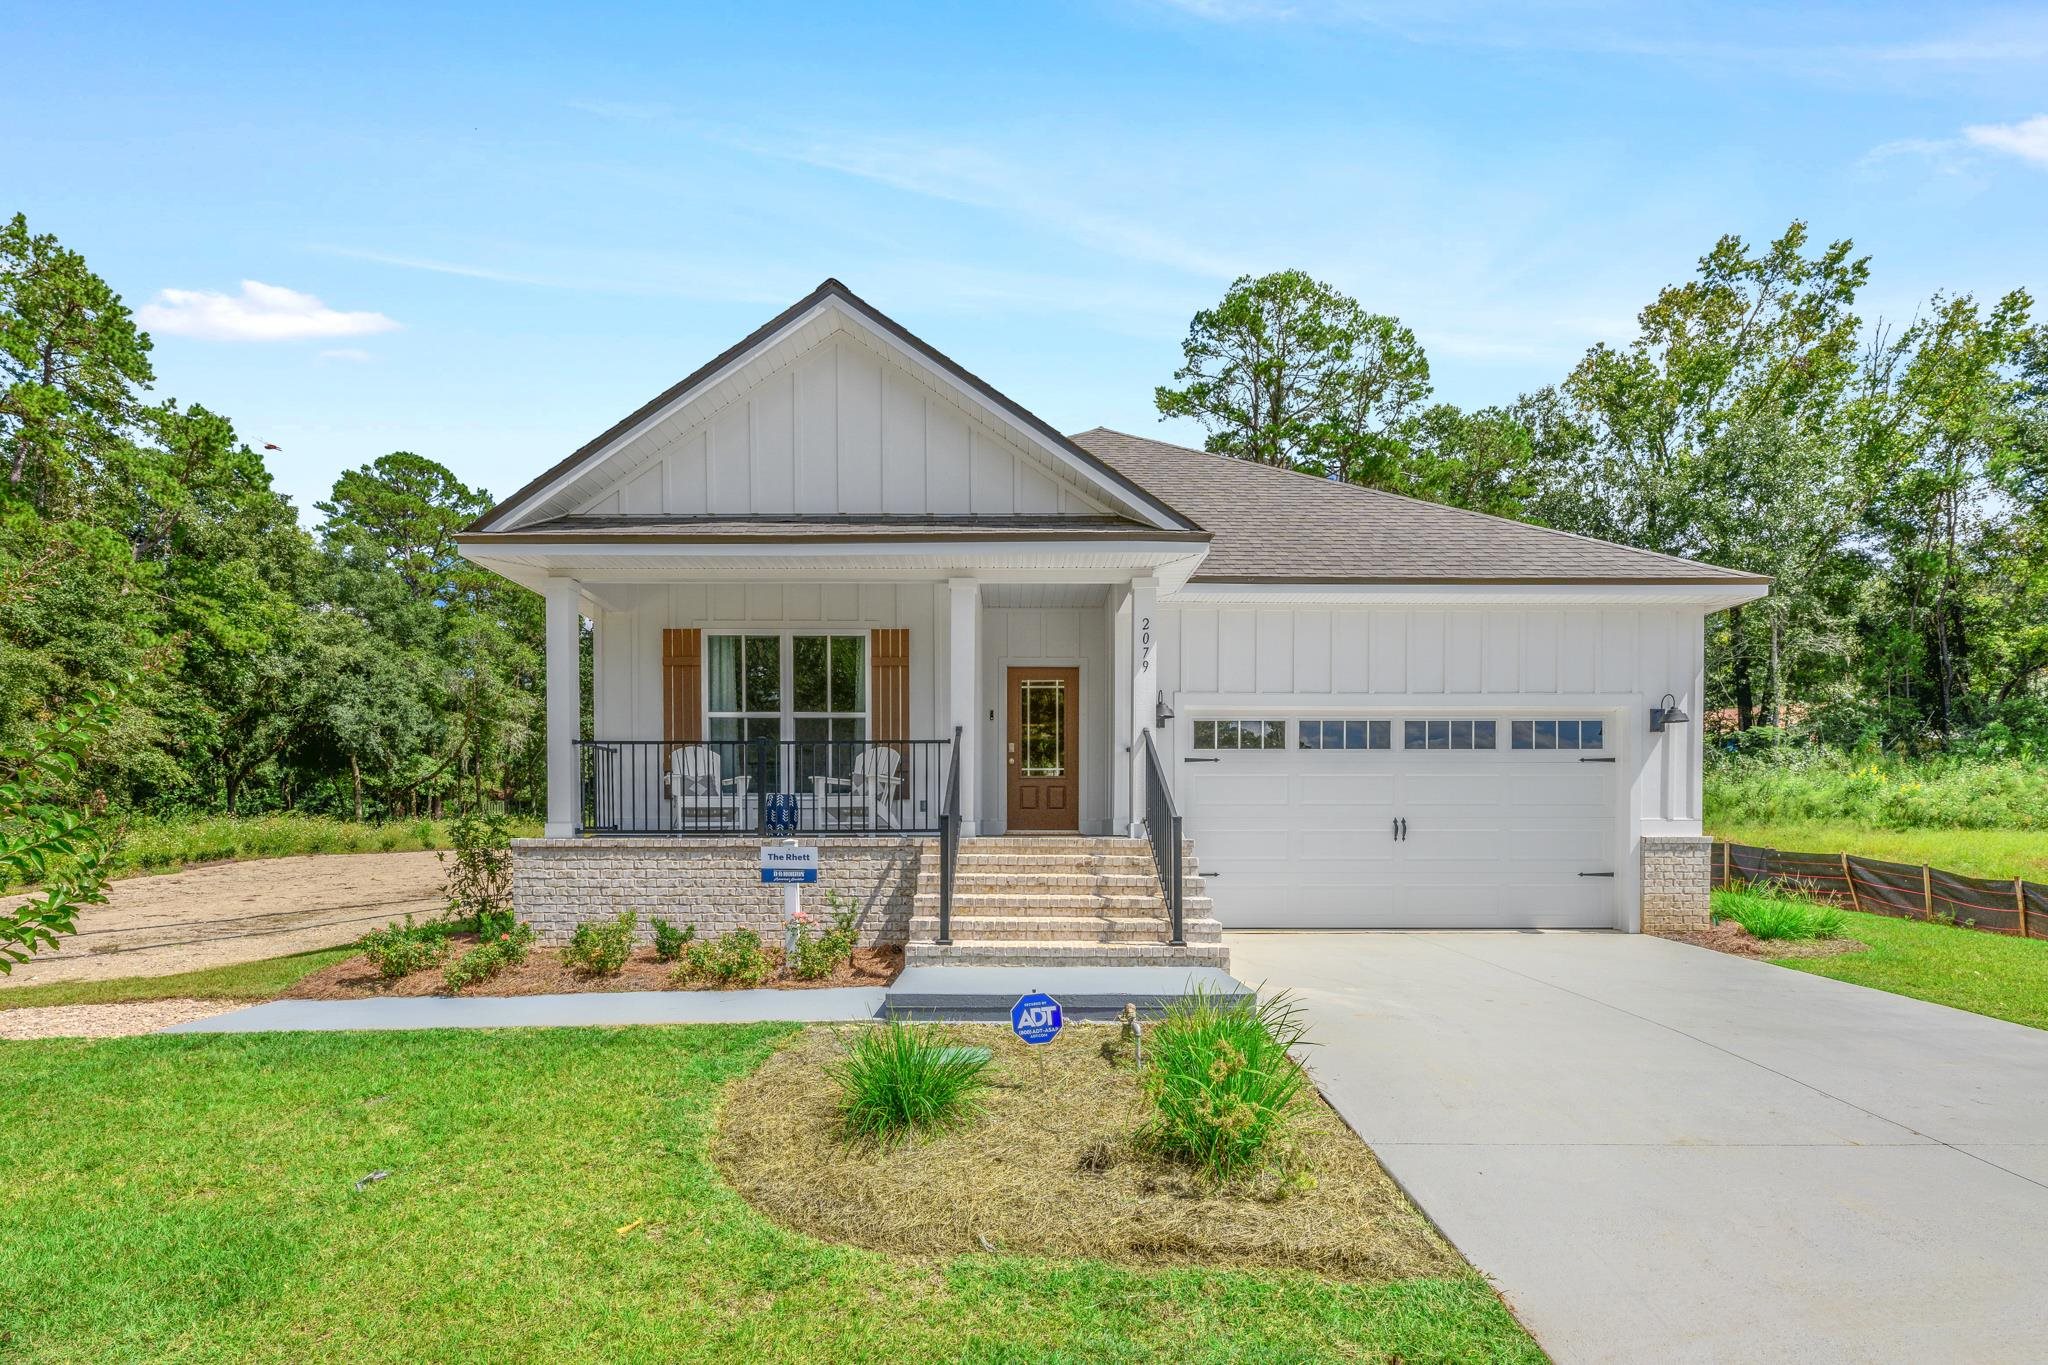 2051 Hansell Hill Drive,TALLAHASSEE,Florida 32308,4 Bedrooms Bedrooms,2 BathroomsBathrooms,Detached single family,2051 Hansell Hill Drive,366808